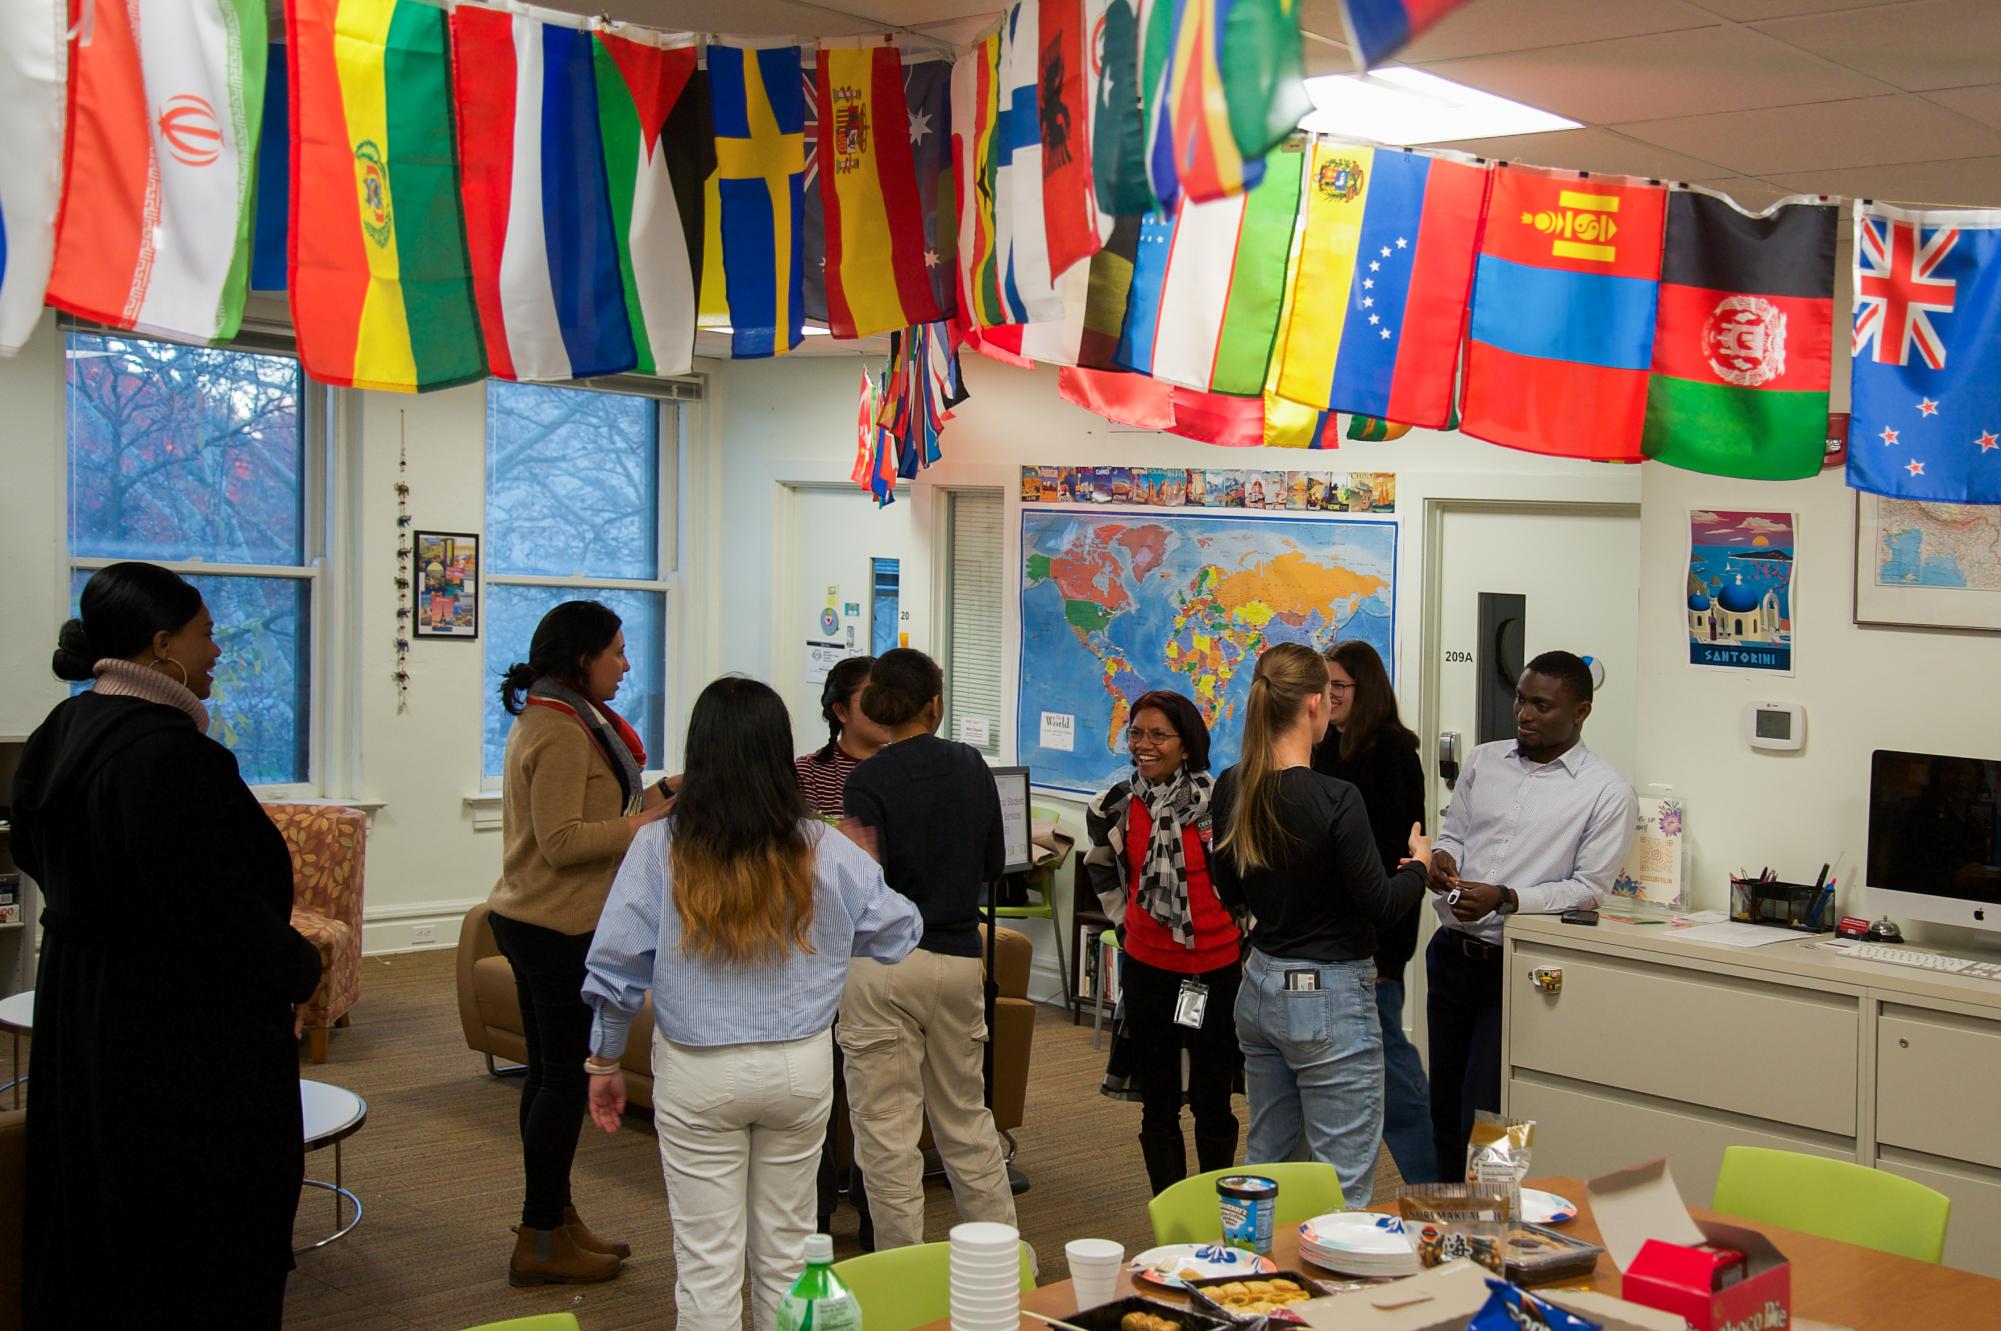 Events celebrating international students were held throughout the week.